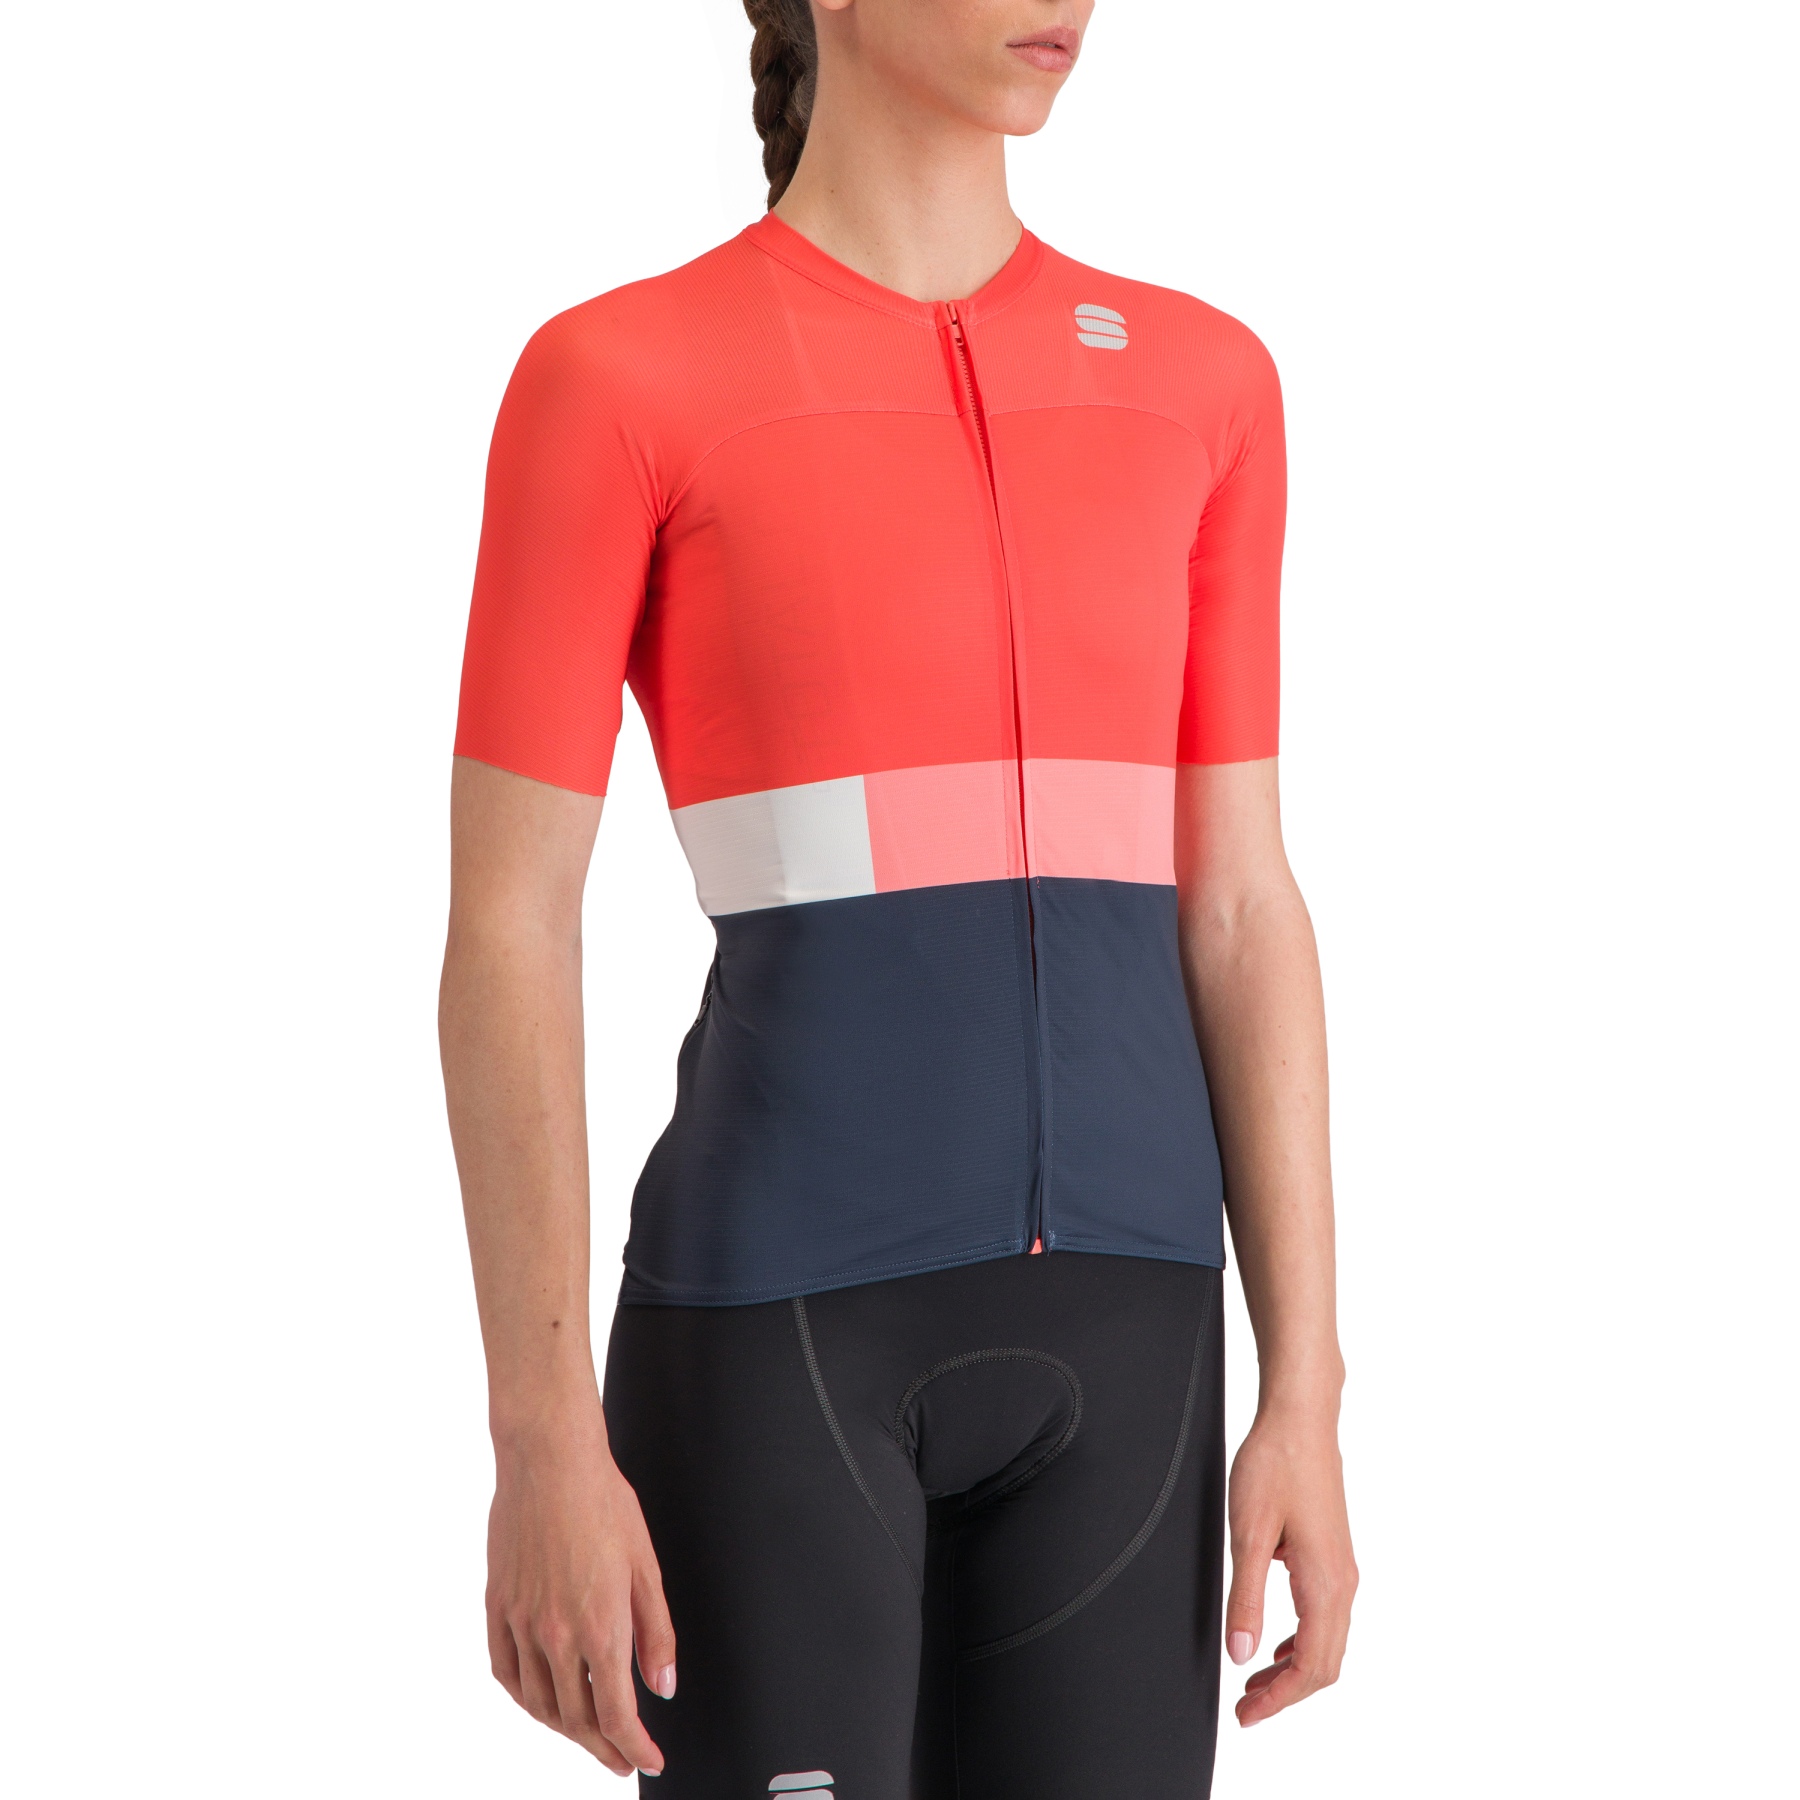 Picture of Sportful Snap Jersey Women - 117 Pompelmo Galaxy Blue